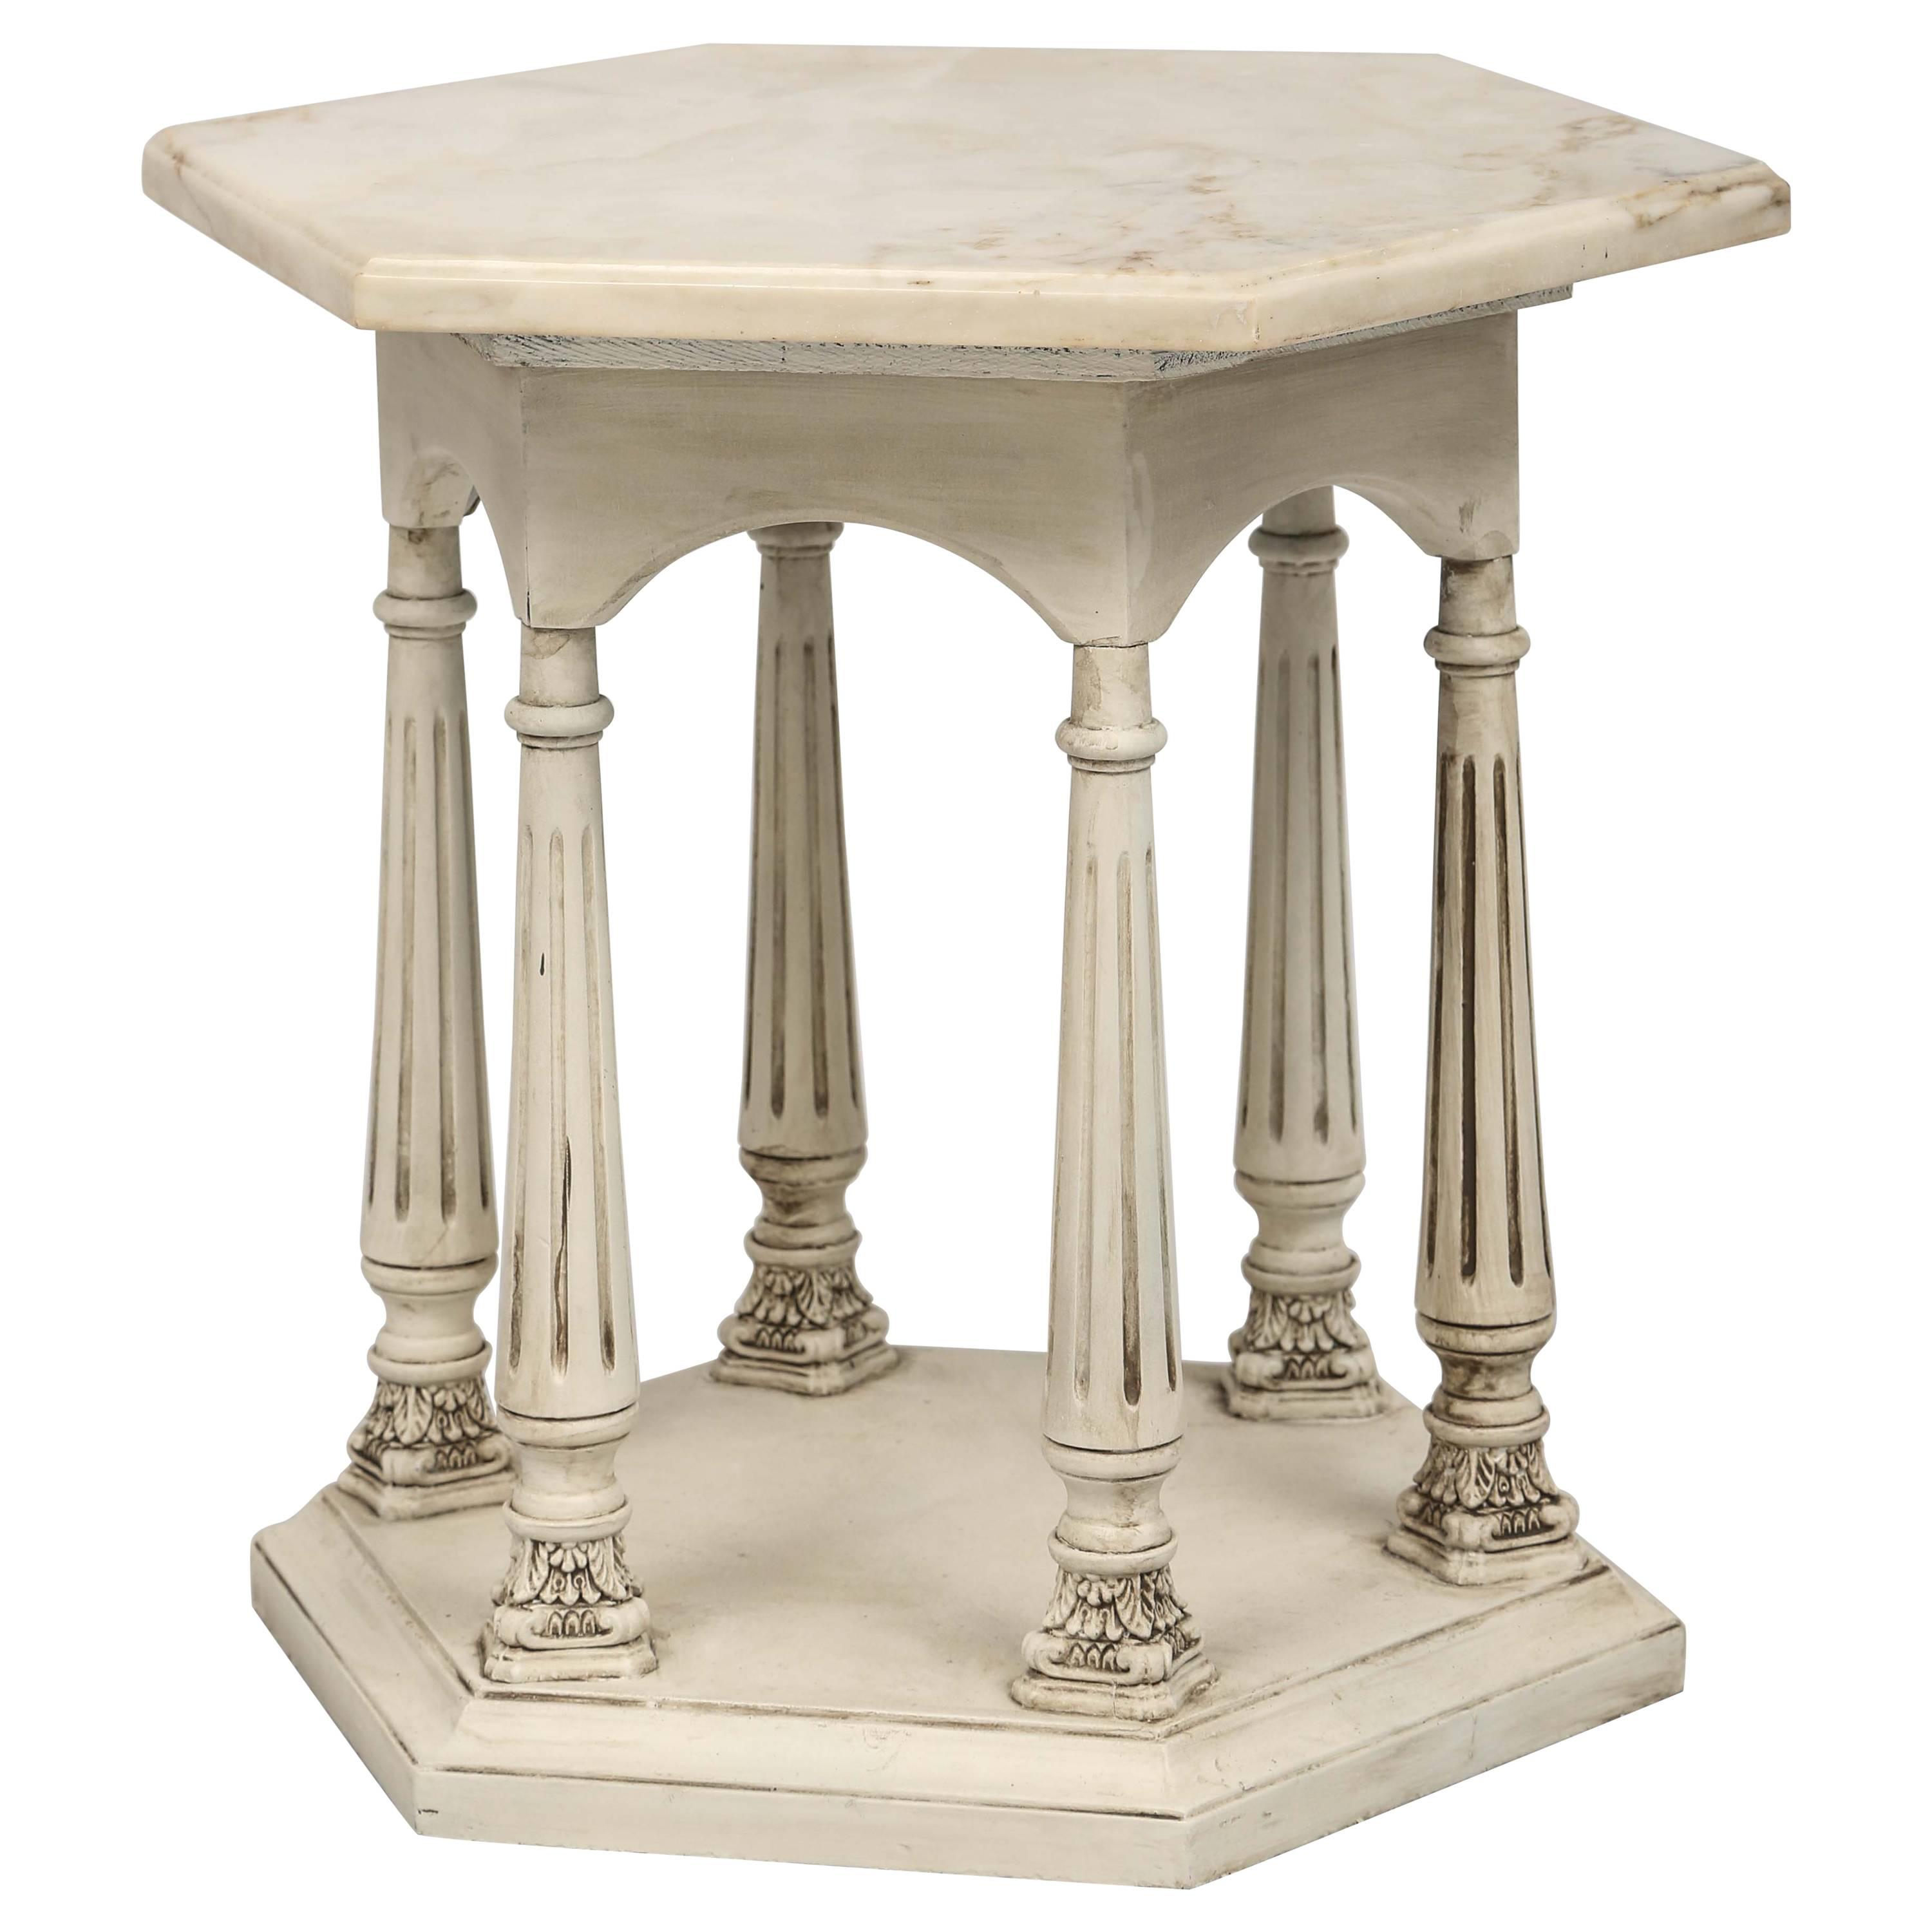 octagonal neoclassical style painted accent table for master wood glass coffee with shelf target bookcase white round and chairs french antique furniture inch plastic tablecloths